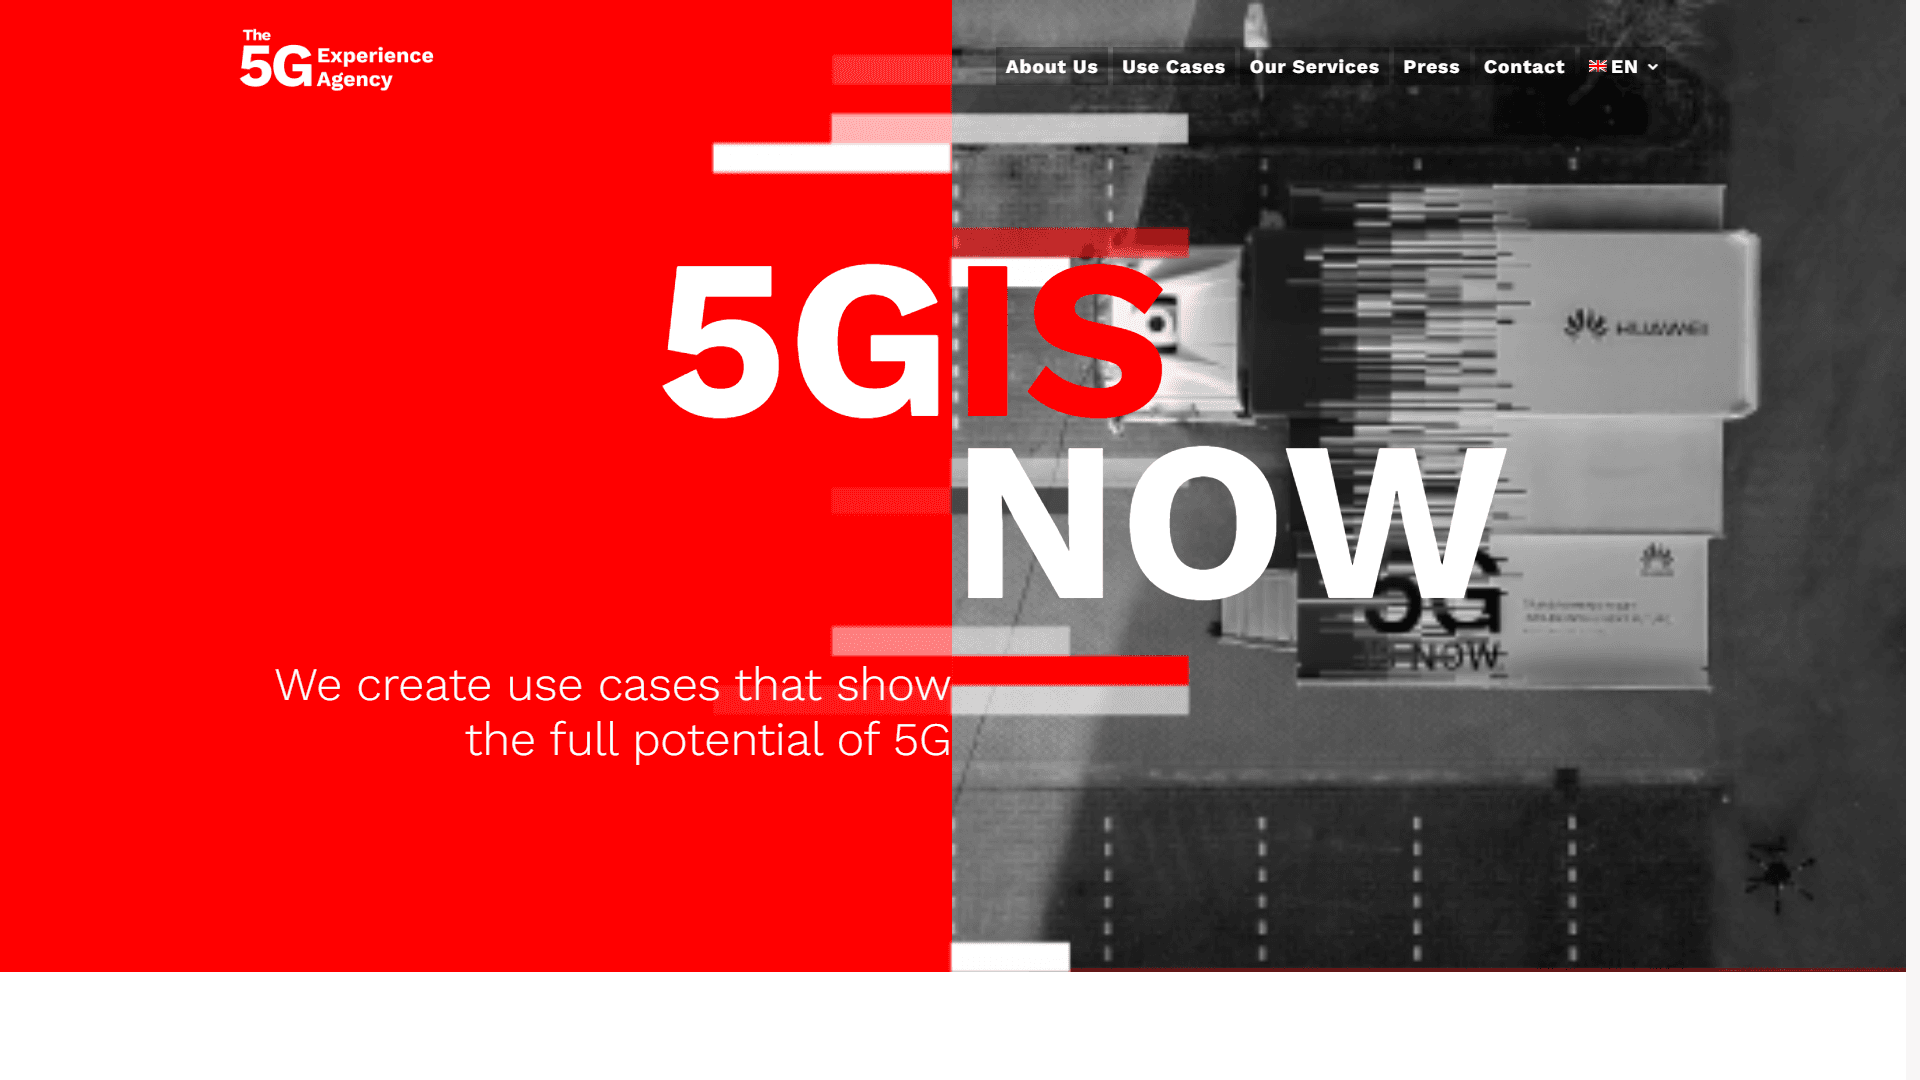 5G IS NOW